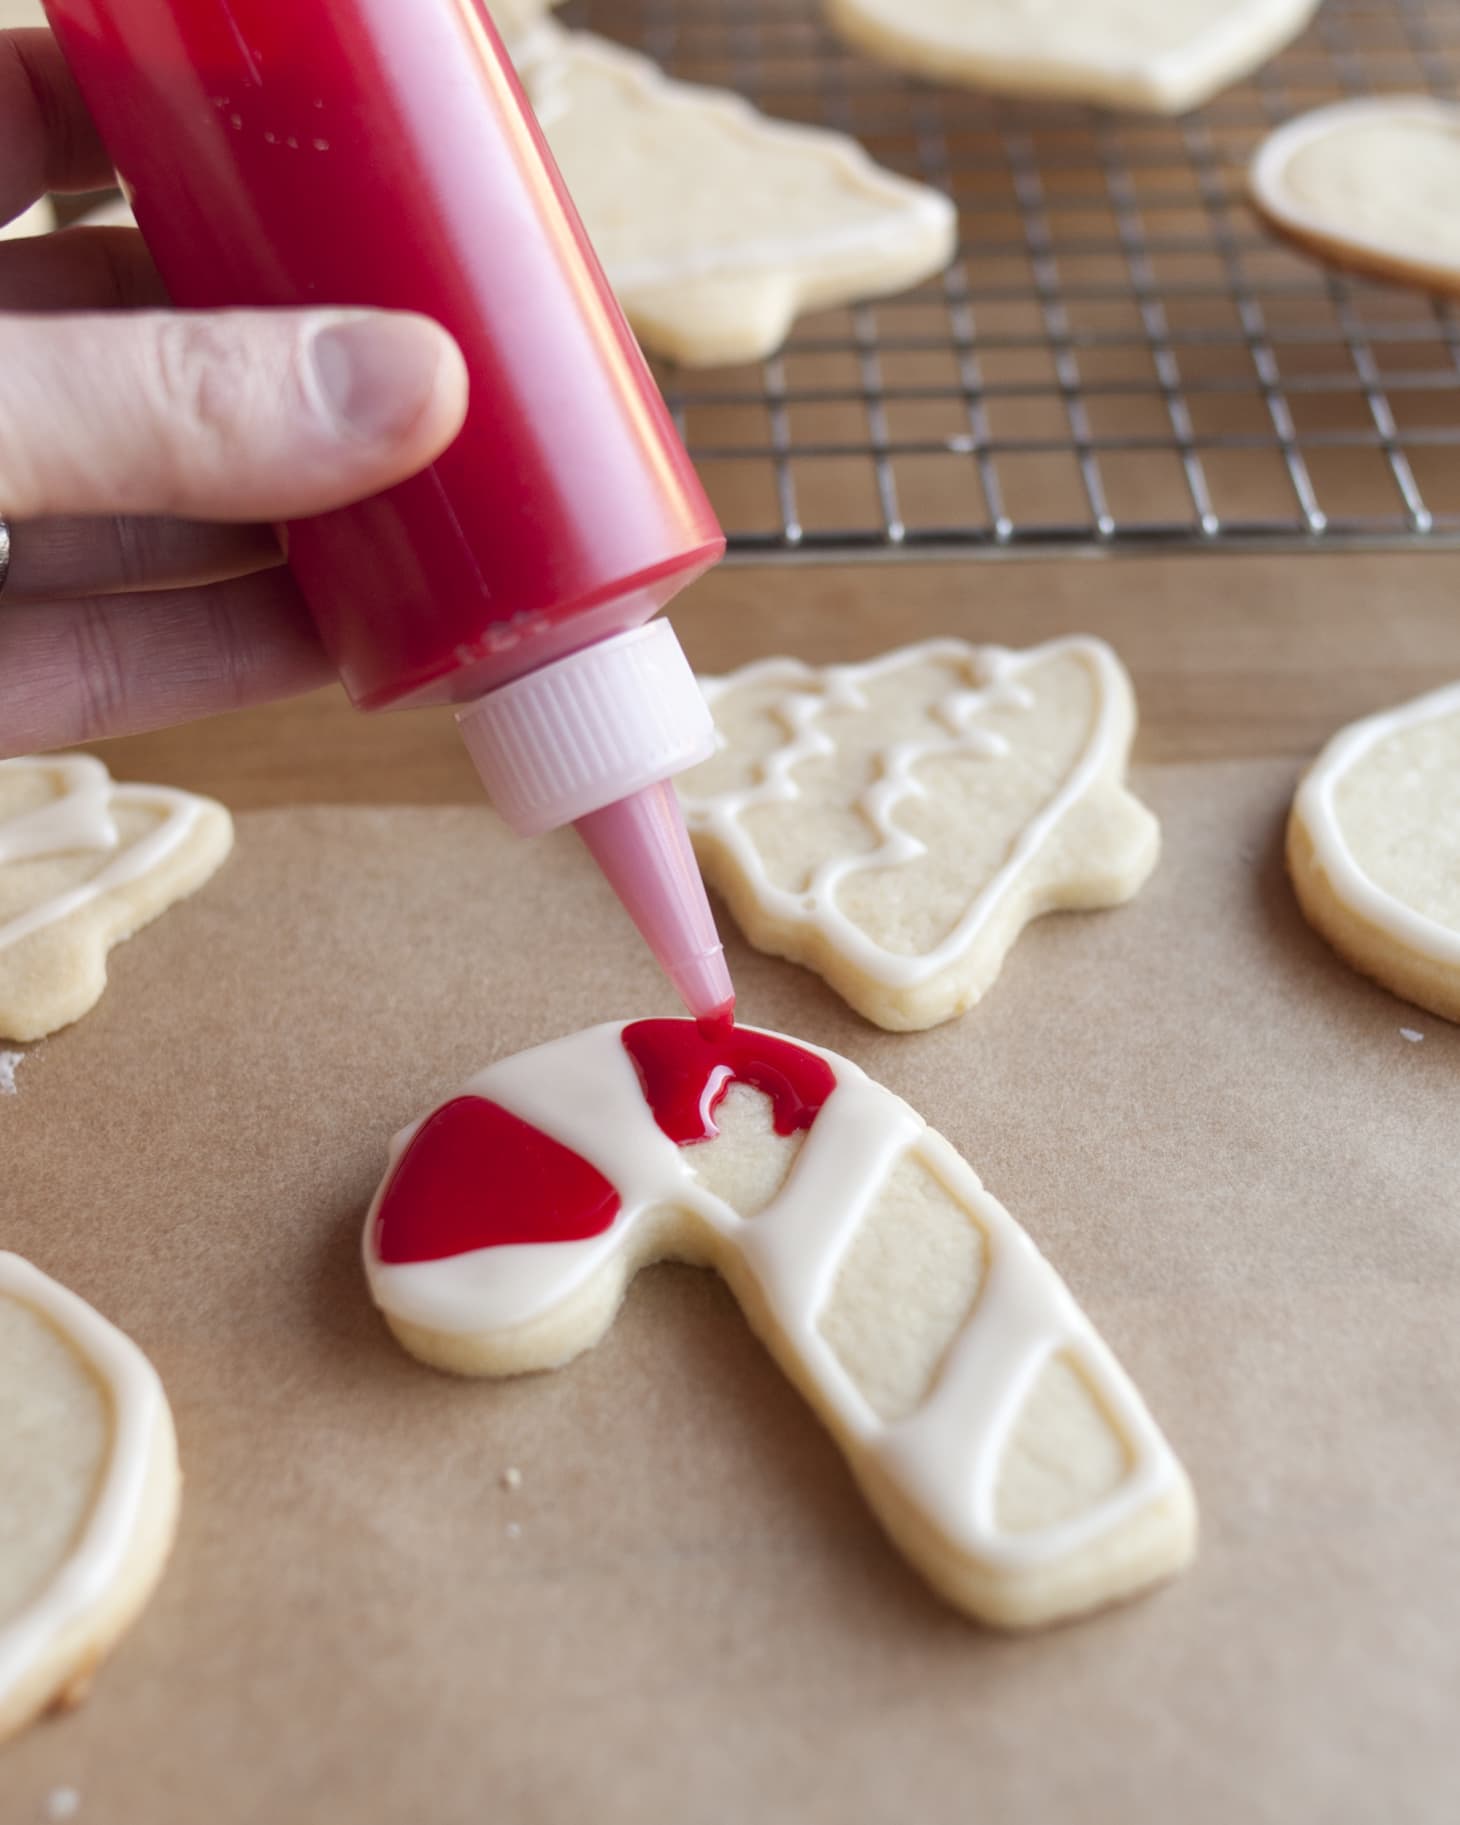 How To Decorate Cookies with 2-Ingredient Easy Icing | Kitchn